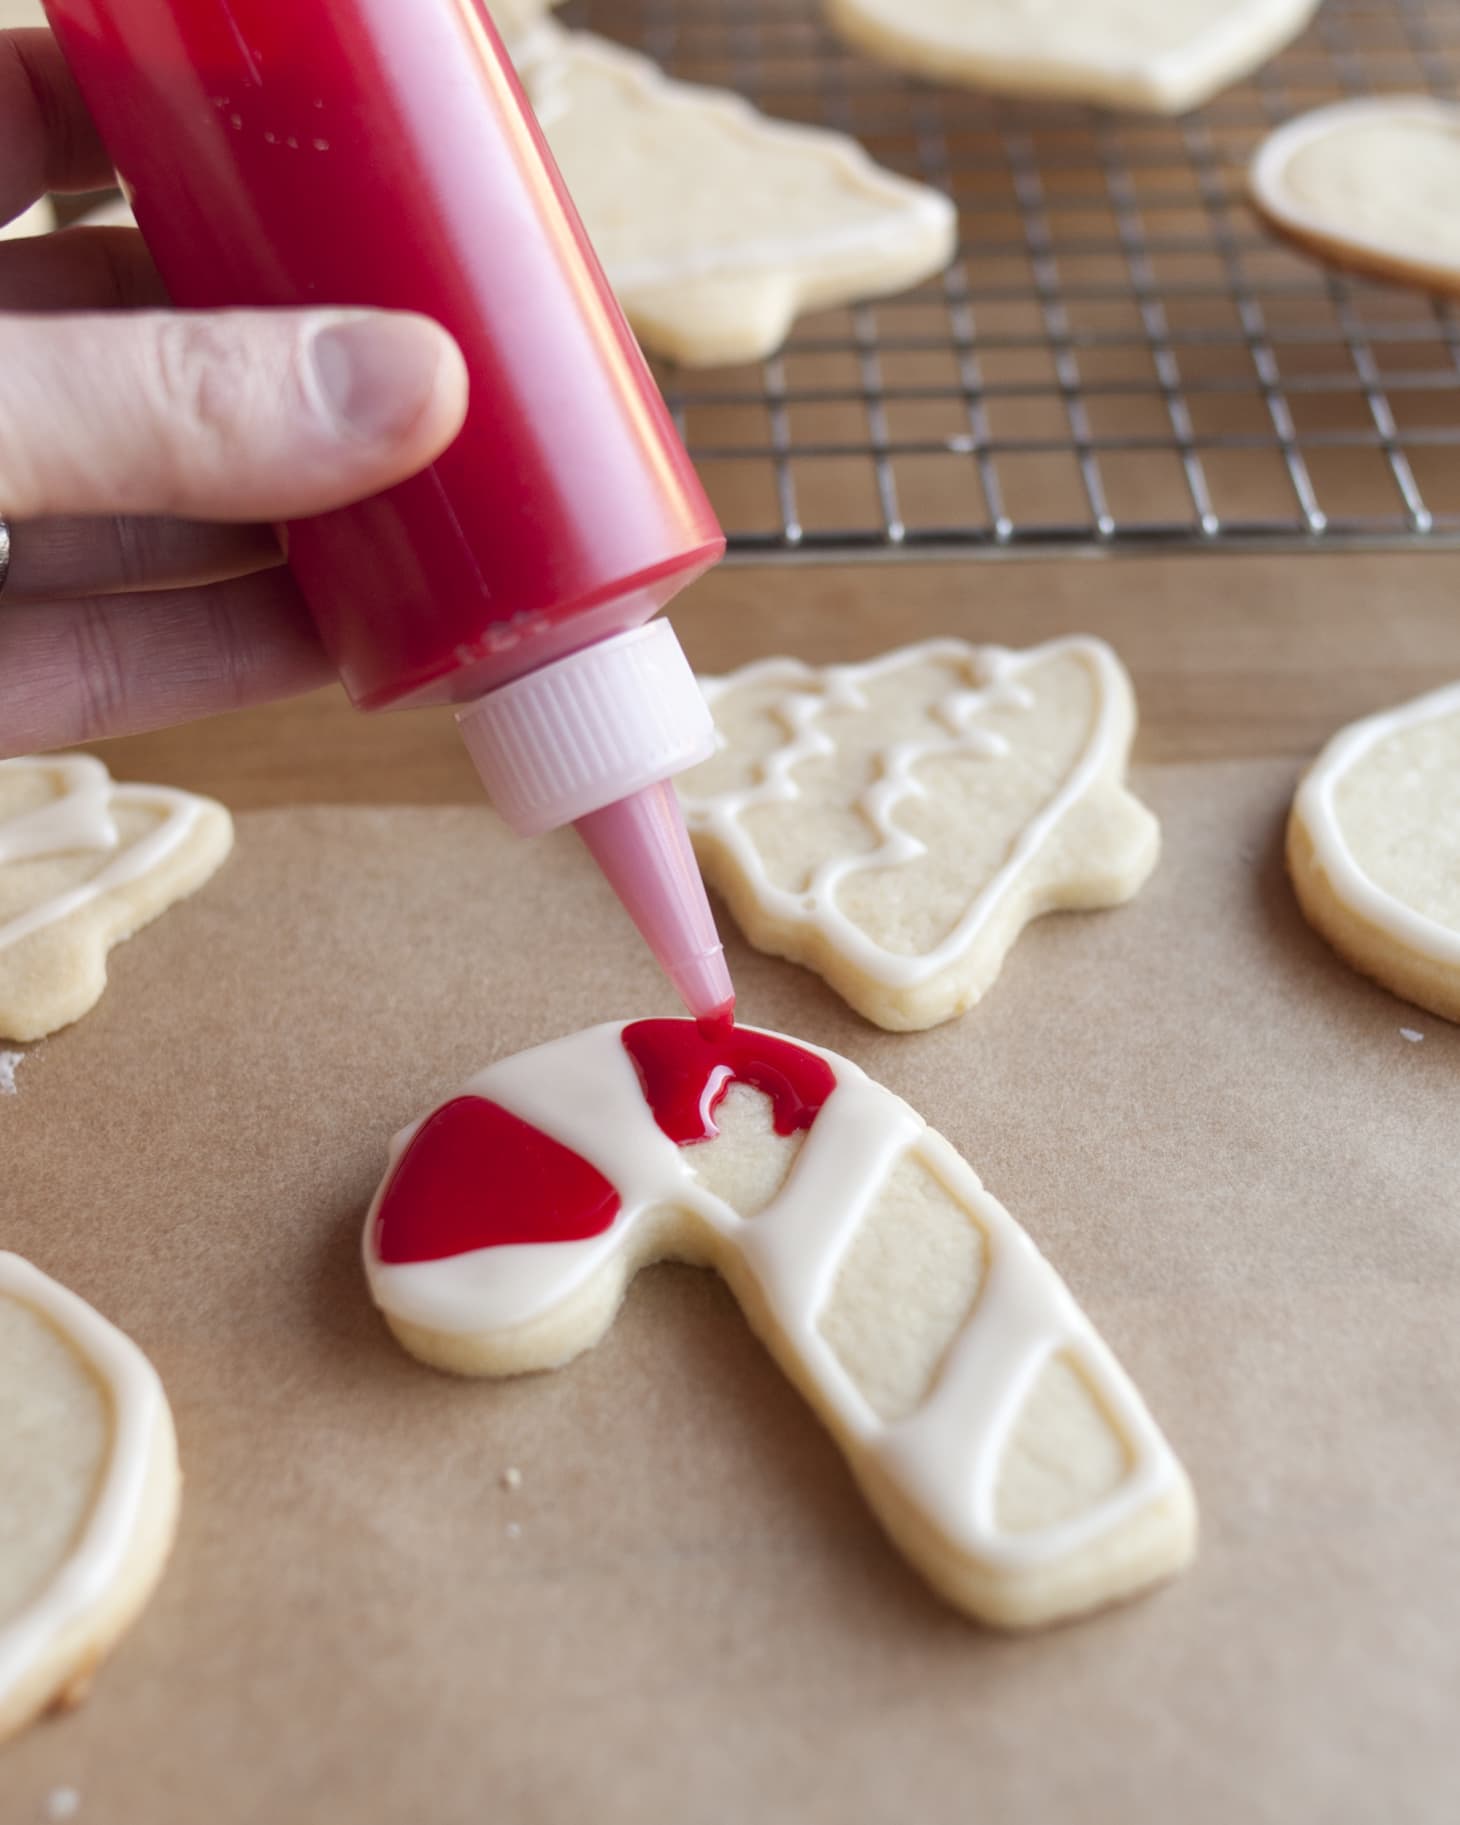 How To Decorate Cookies with 2-Ingredient Easy Icing | Kitchn